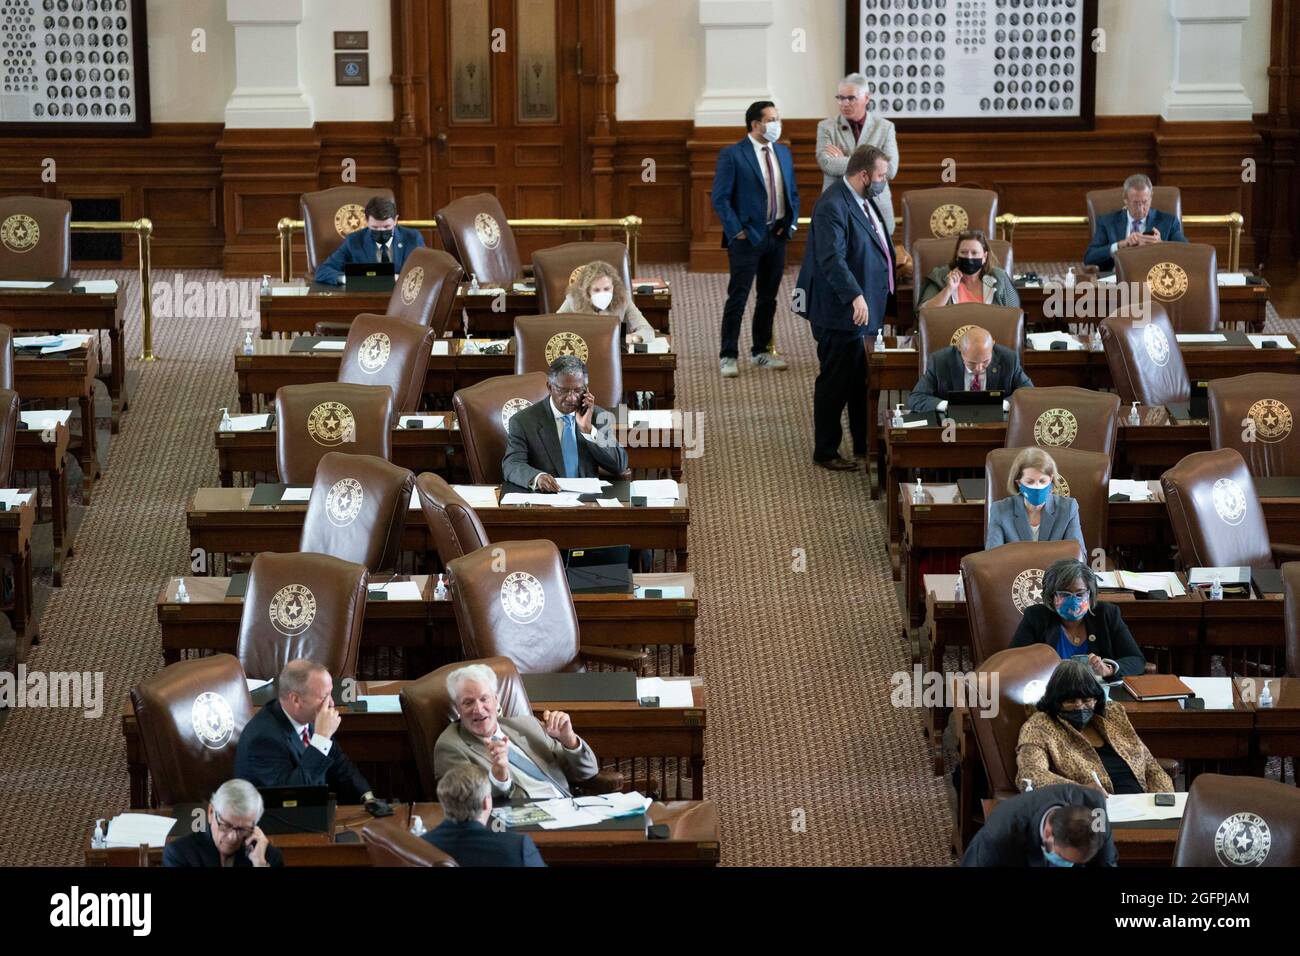 Austin Texas USA, Aug. 26, 2021: The Texas House chamber has a quorum as members debate SB 1, a Republican-led measure that would tighten voting procedures in Texas including a ban on 24-hour voting and mail-in ballot restrictions. The bill led to a 34-day Democratic walkout. Credit: Bob Daemmrich/Alamy Live News Stock Photo